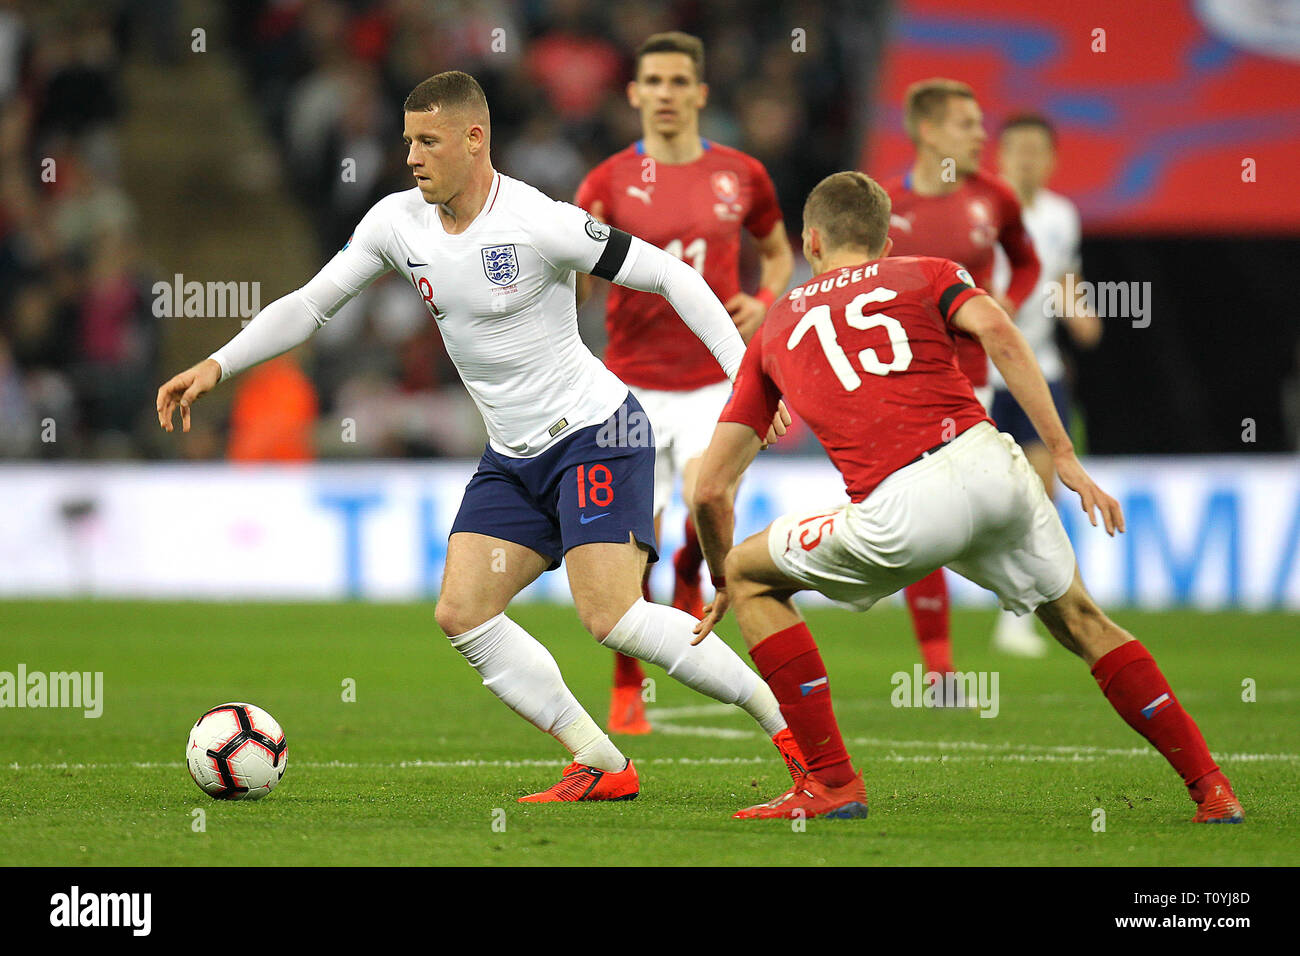 London, UK. 22nd Mar, 2019. Ross Barkley of England goes past Tomas Soucek of Czech Republic during the UEFA Euro 2020 Qualifying Group A match between England and Czech Republic at Wembley Stadium on March 22nd 2019 in London, England. (Photo by Matt Bradshaw/phcimages.com) Credit: PHC Images/Alamy Live News Stock Photo